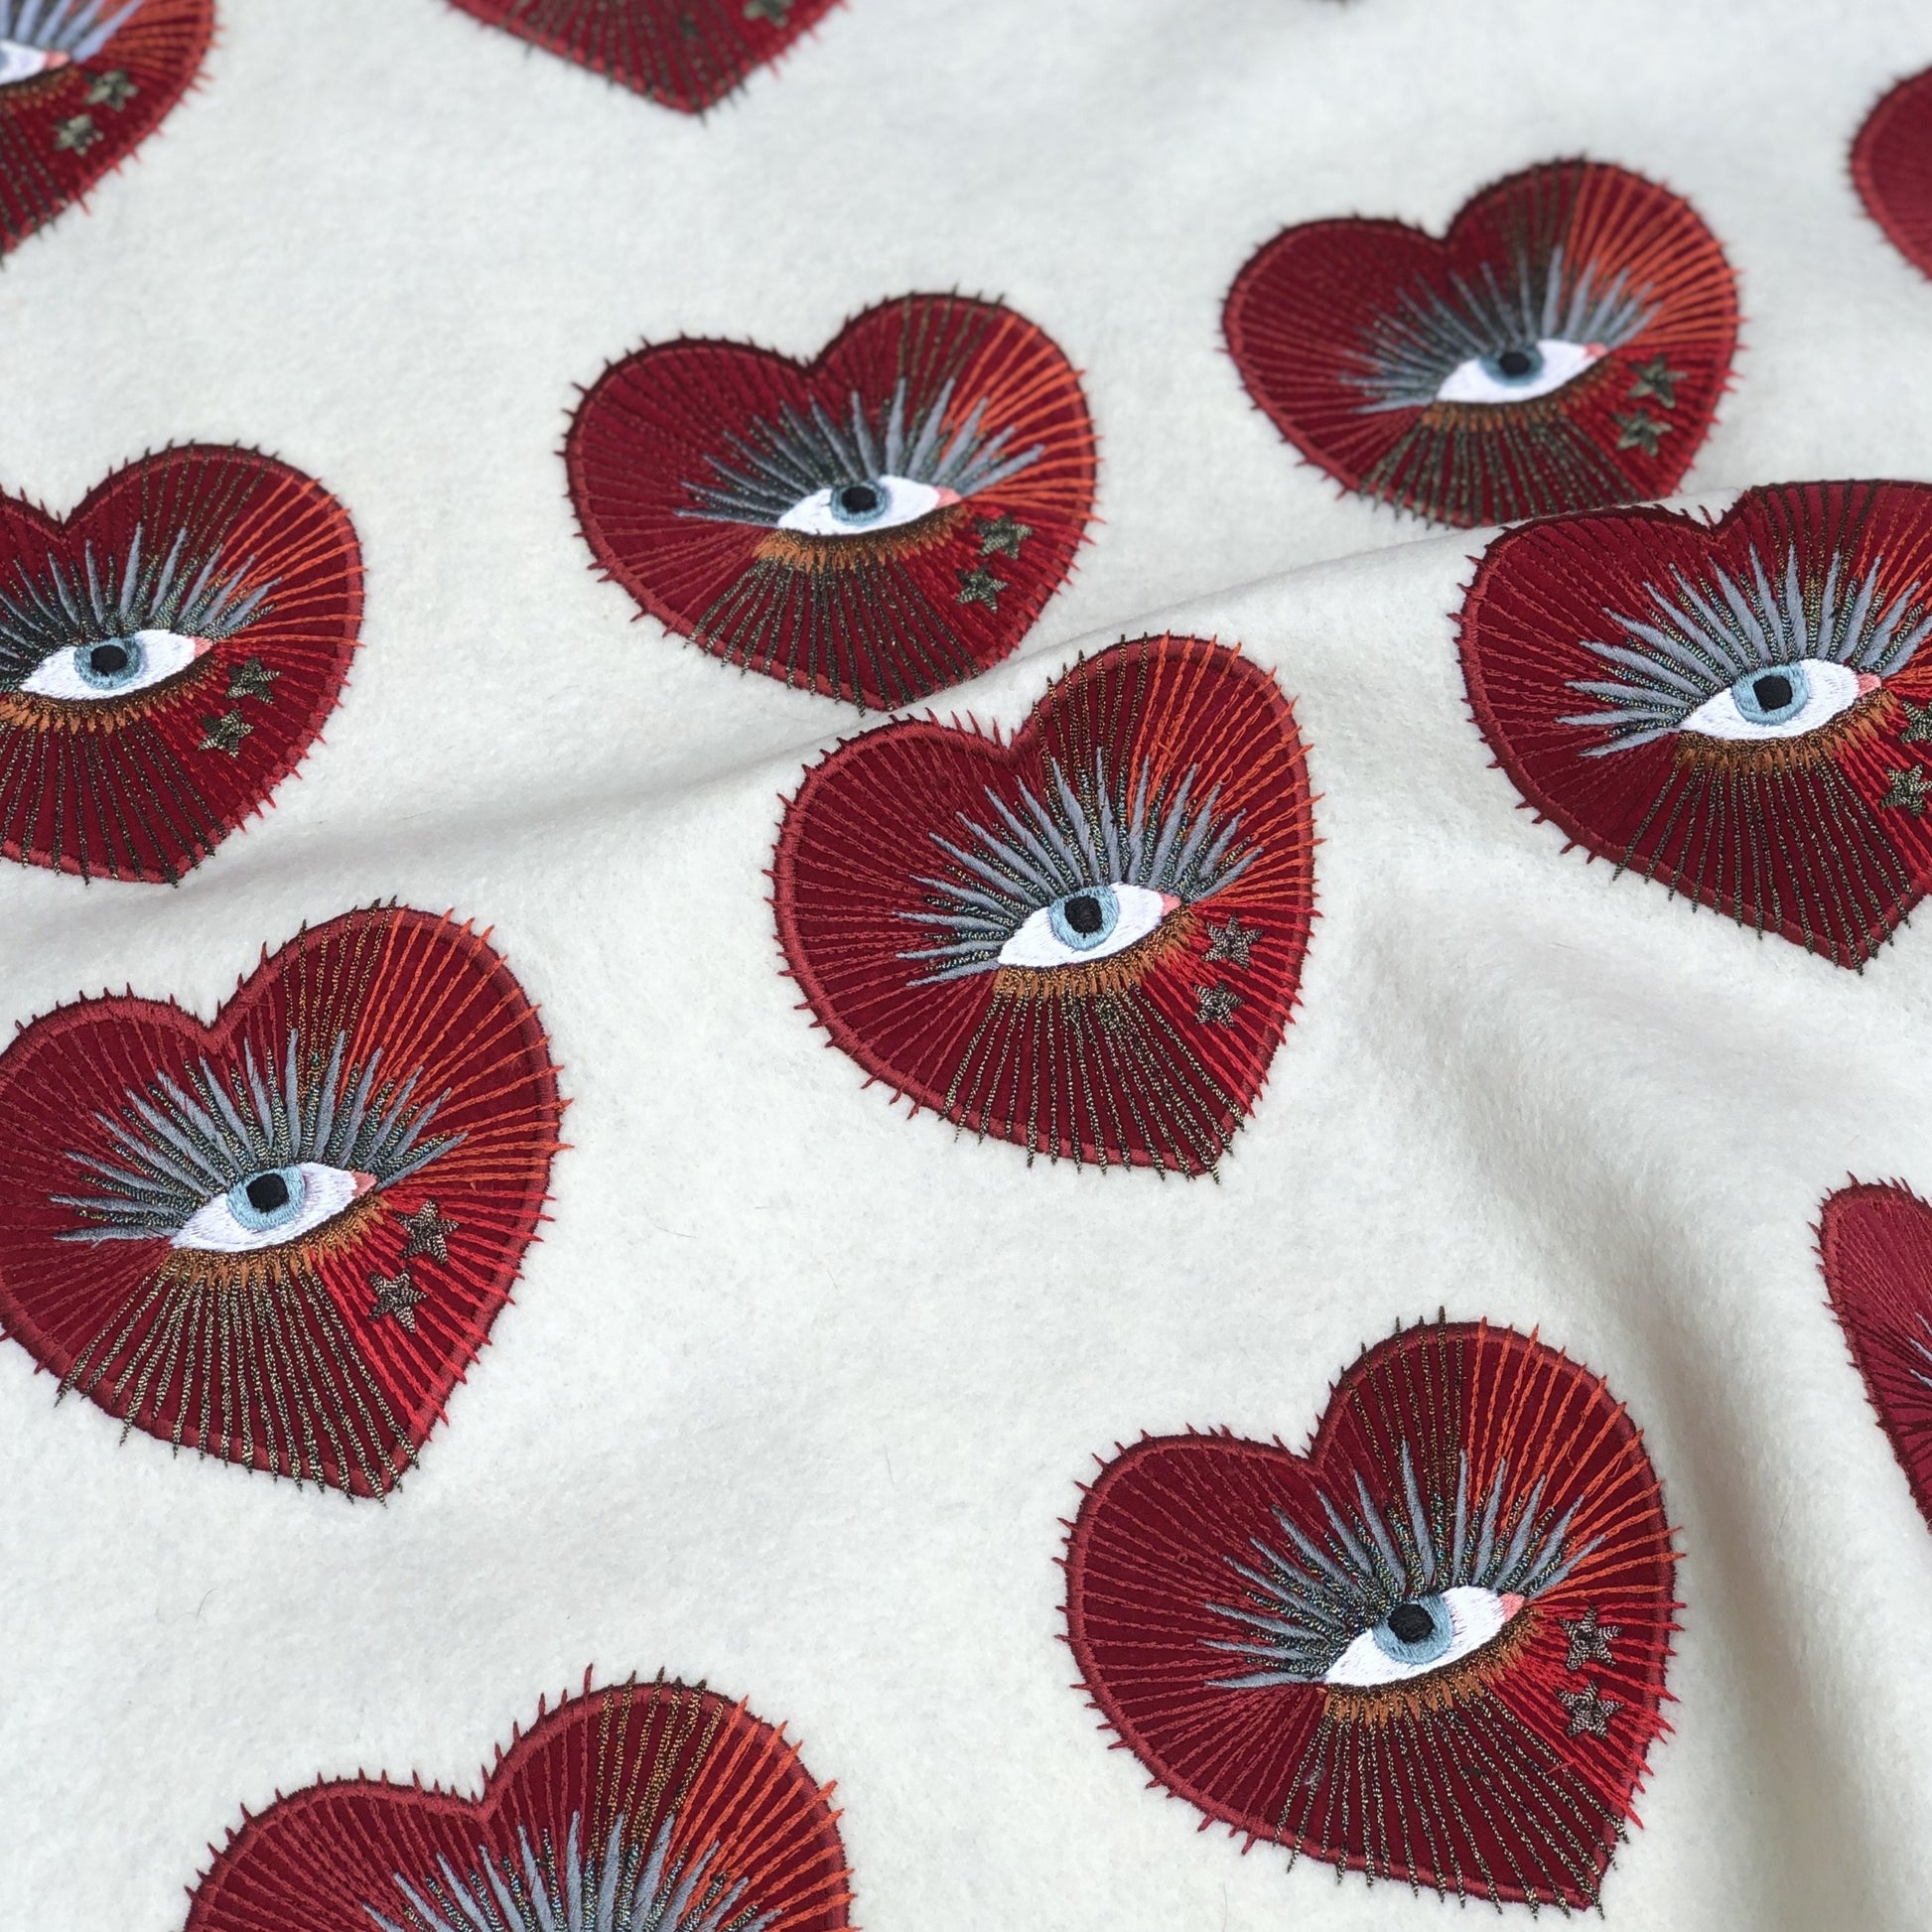 Selection of pre-cut sacred heart with eye embroidered patches